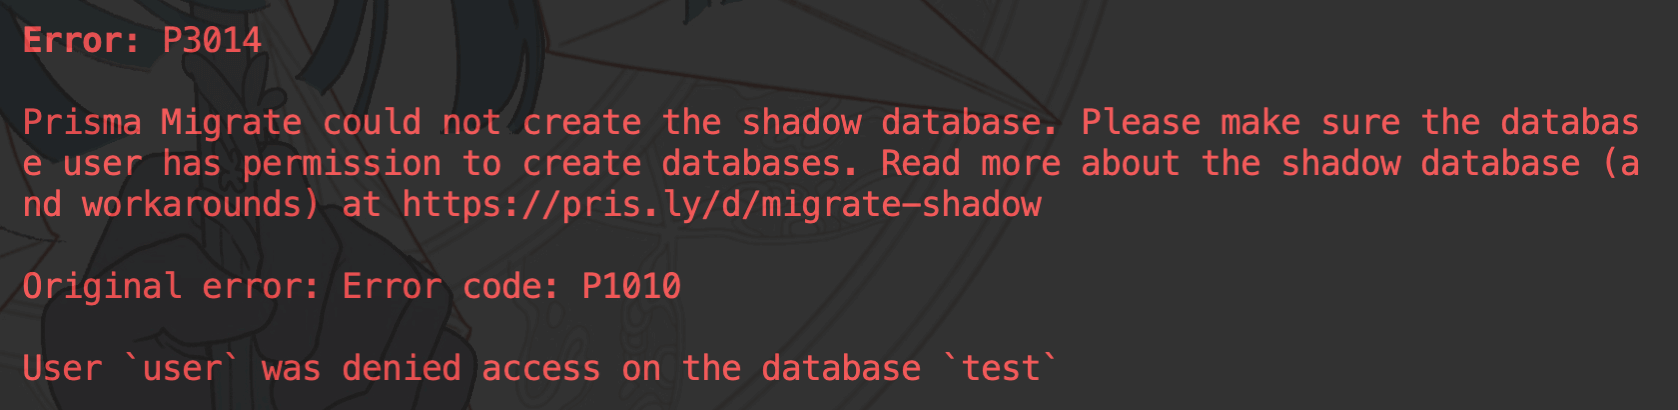 Prisma Migrate could not create the shadow database. Please make sure the database user has permission to create database.